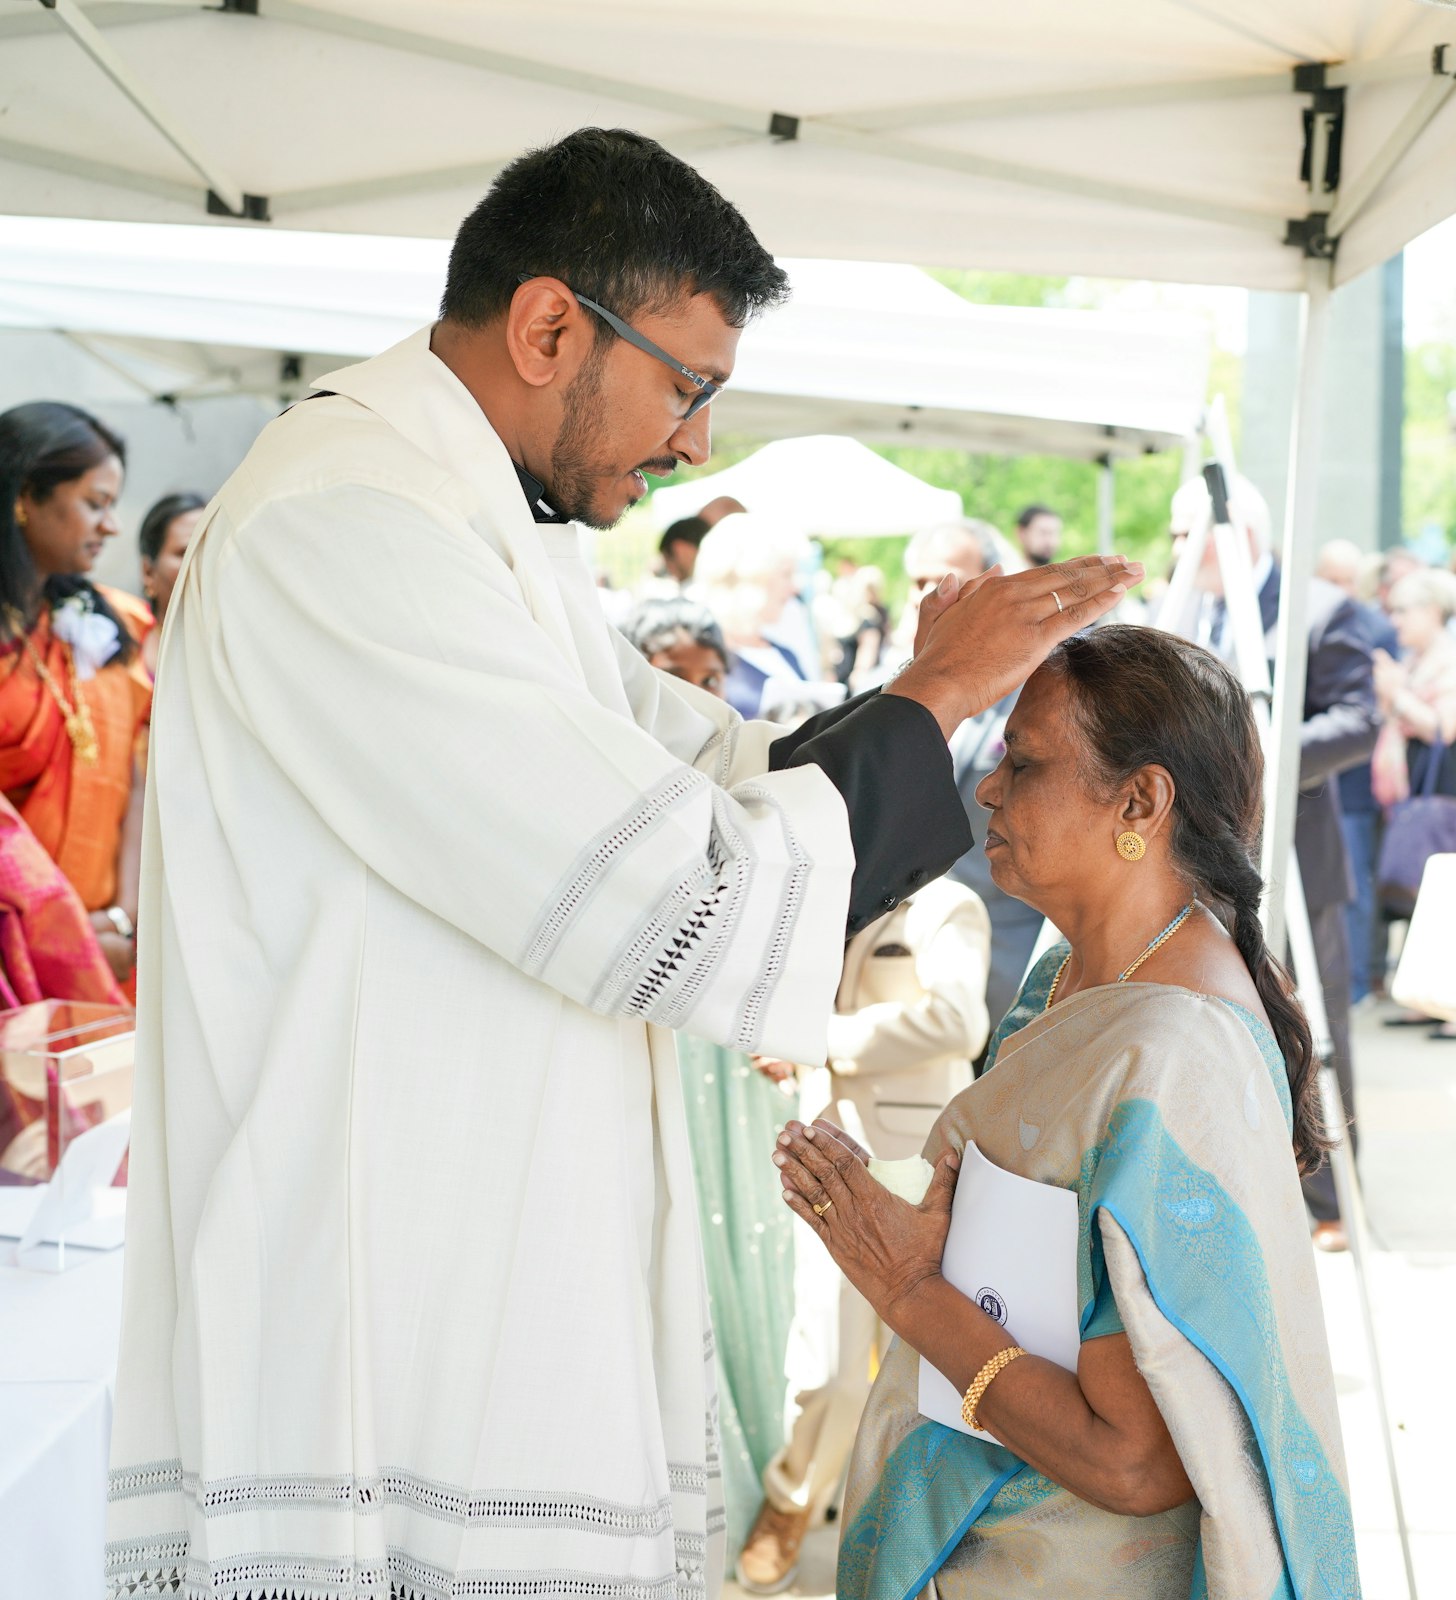 Fr. Michael Selvaraj blesses his aunt, who traveled to be present at the cathedral from her home in India, following Fr. Selvaraj's ordination to the priesthood May 27.